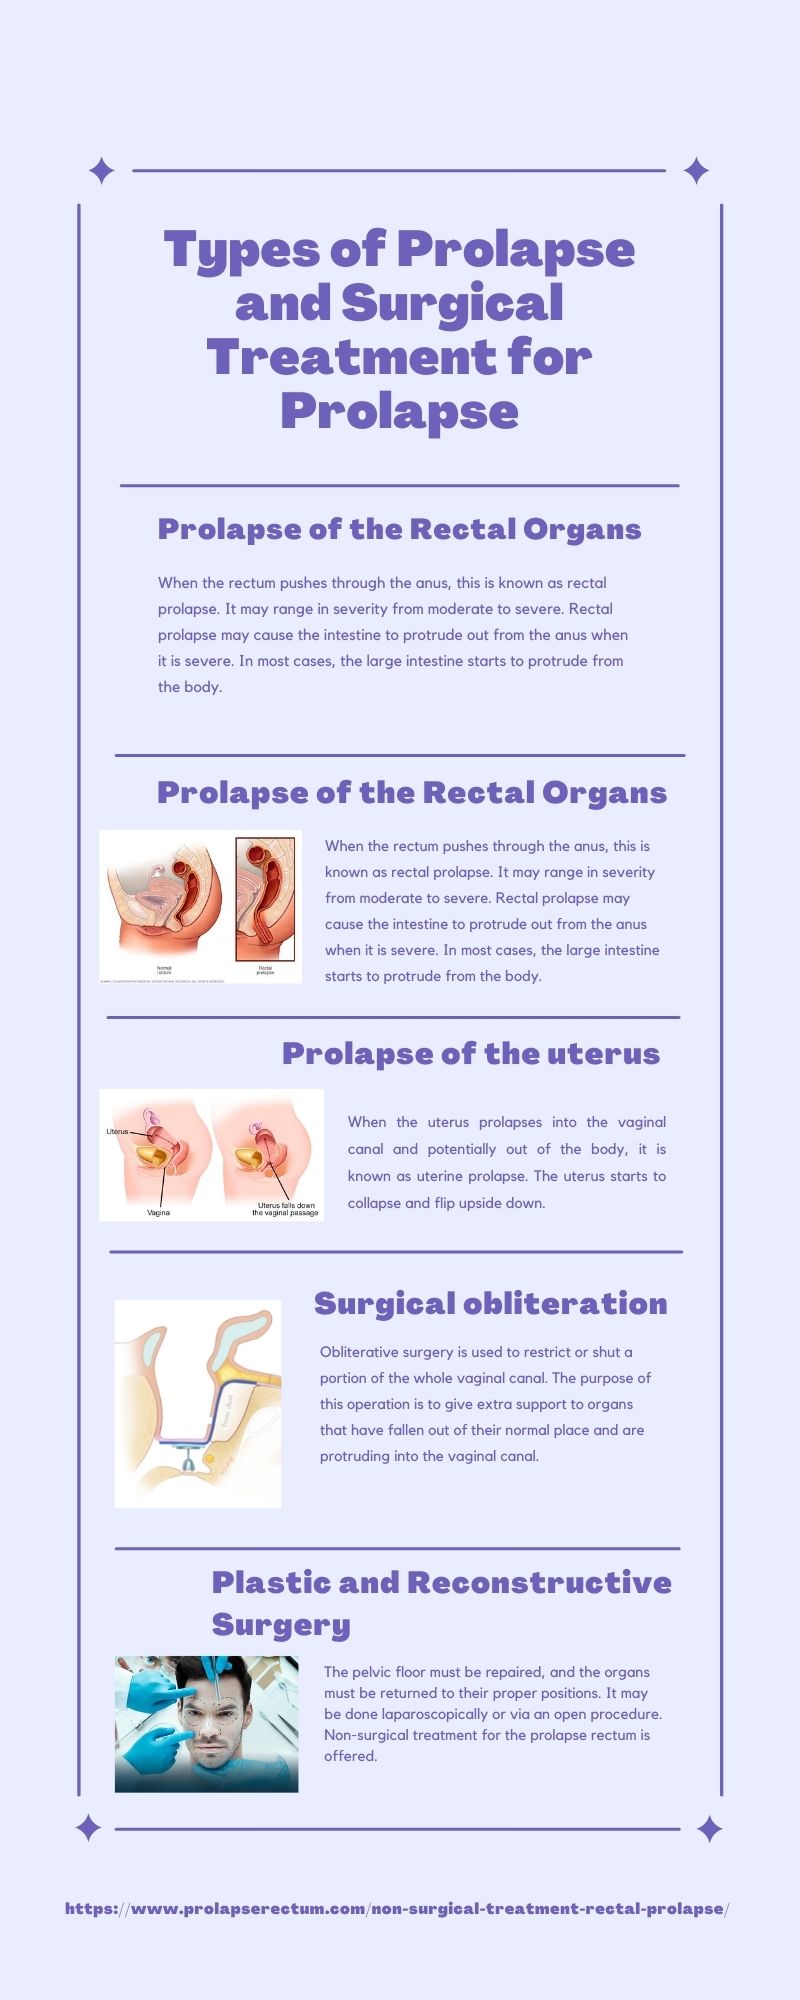 Types of Prolapse and Surgical Treatment for Prolapse